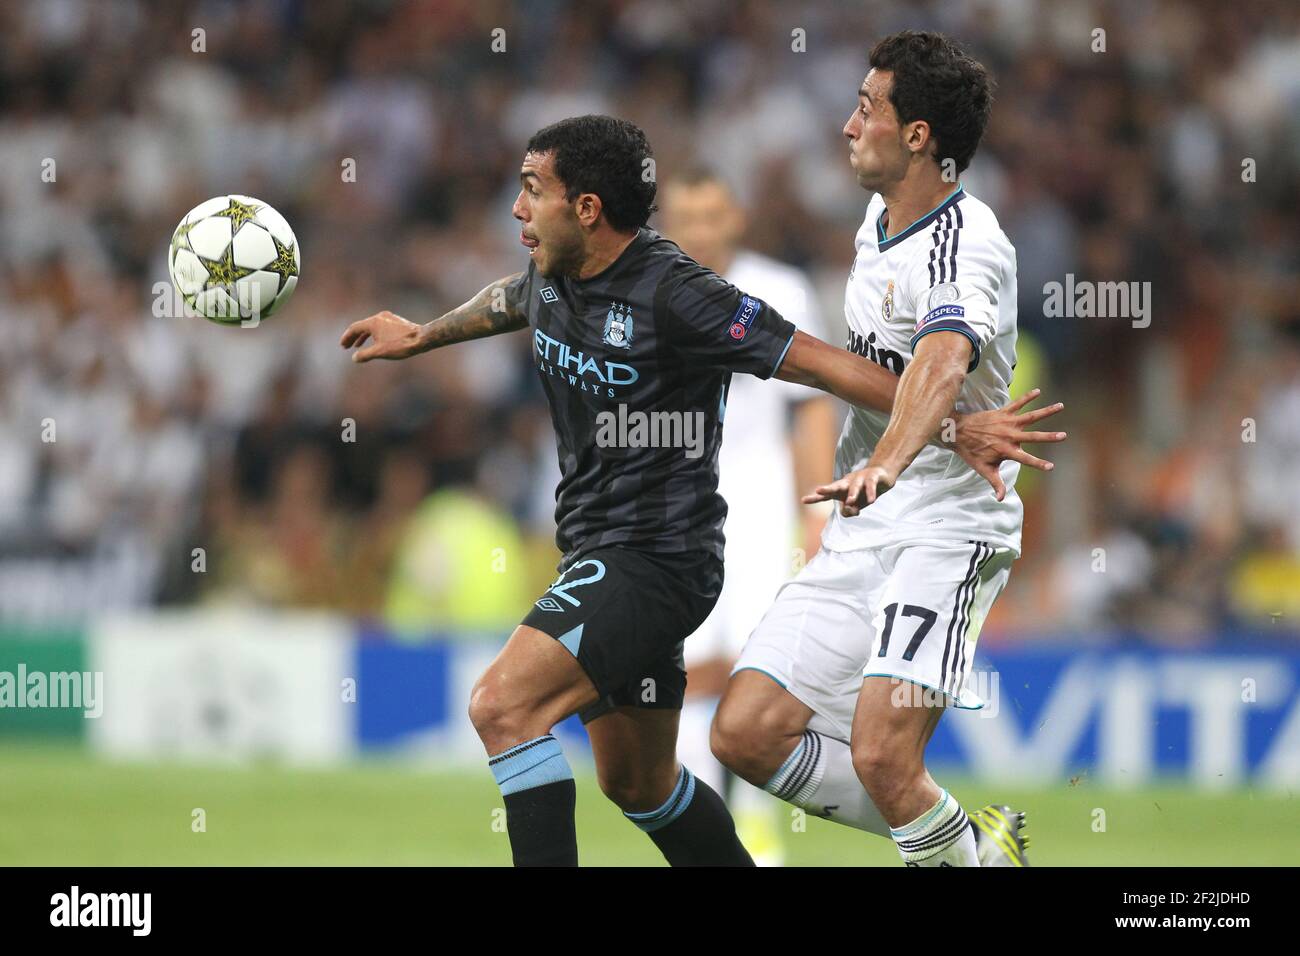 FOOTBALL - UEFA CHAMPIONS LEAGUE 2012/2013 - GROUP STAGE - GROUP D - REAL MADRID v MANCHESTER CITY - 18/09/2012 - PHOTO MANUEL BLONDEAU / AOP PRESS / DPPI - CARLOS TEVEZ AND ALVARO ARBELOA Stock Photo